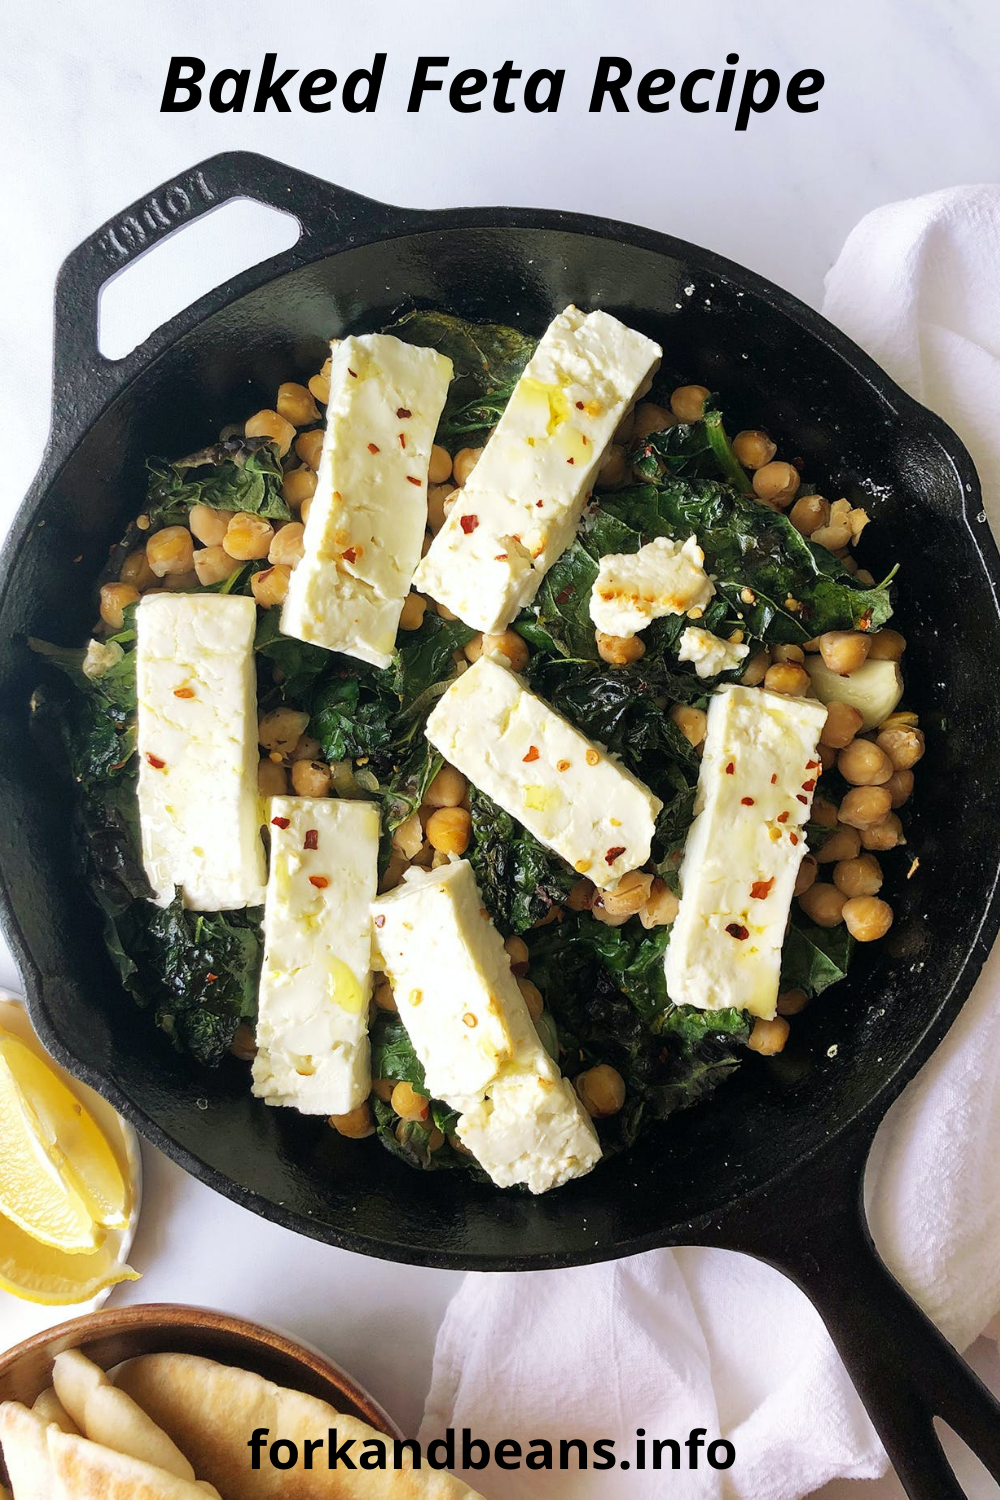 Baked Feta with Garlicky Kale and Chickpeas